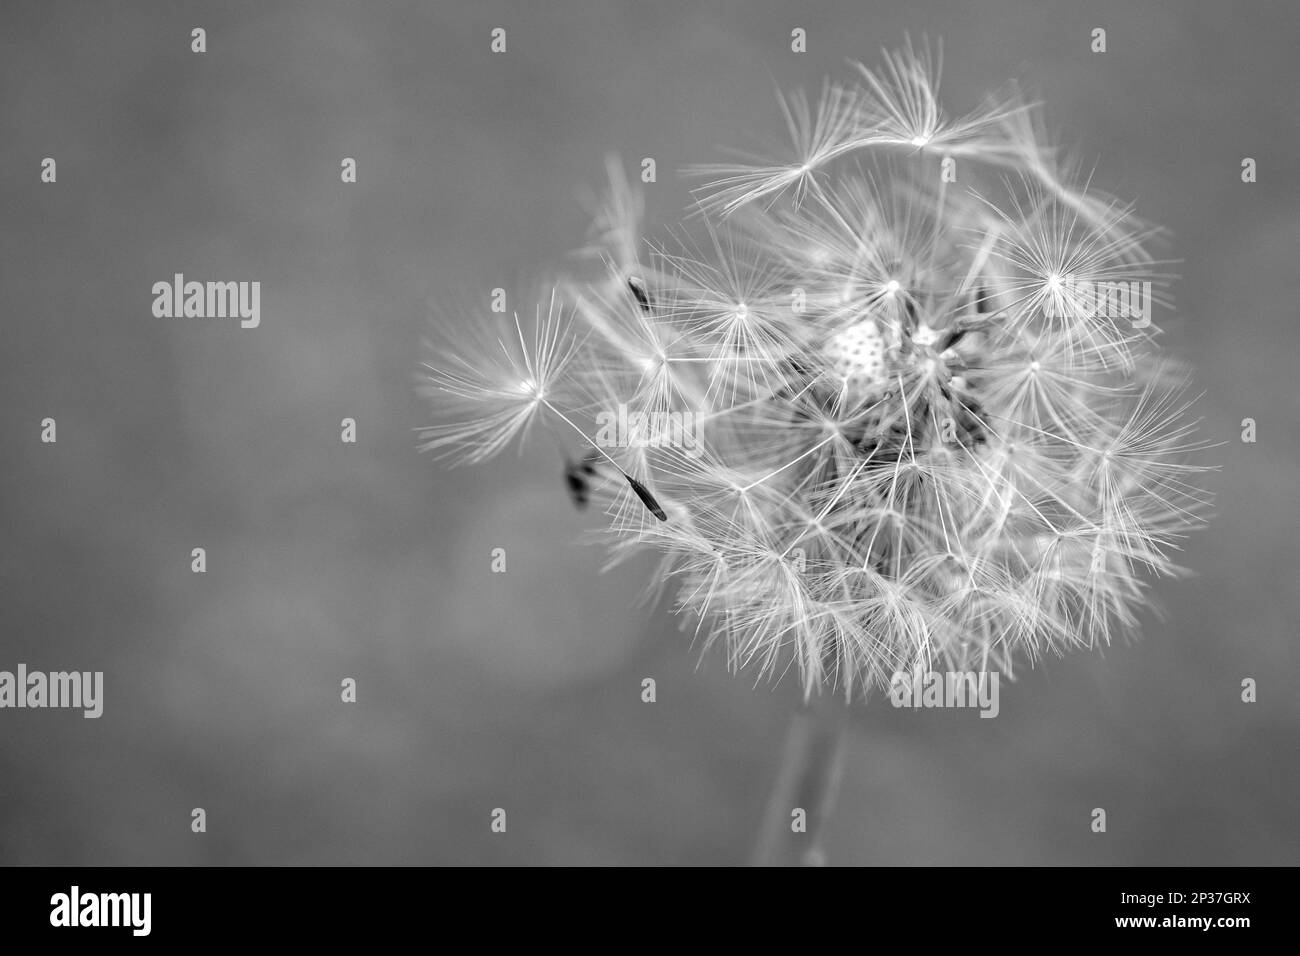 In this monochrome close-up of a dandelion blowball (Taraxacum officinale), the fragility and transience of life are captured in black and white. Stock Photo